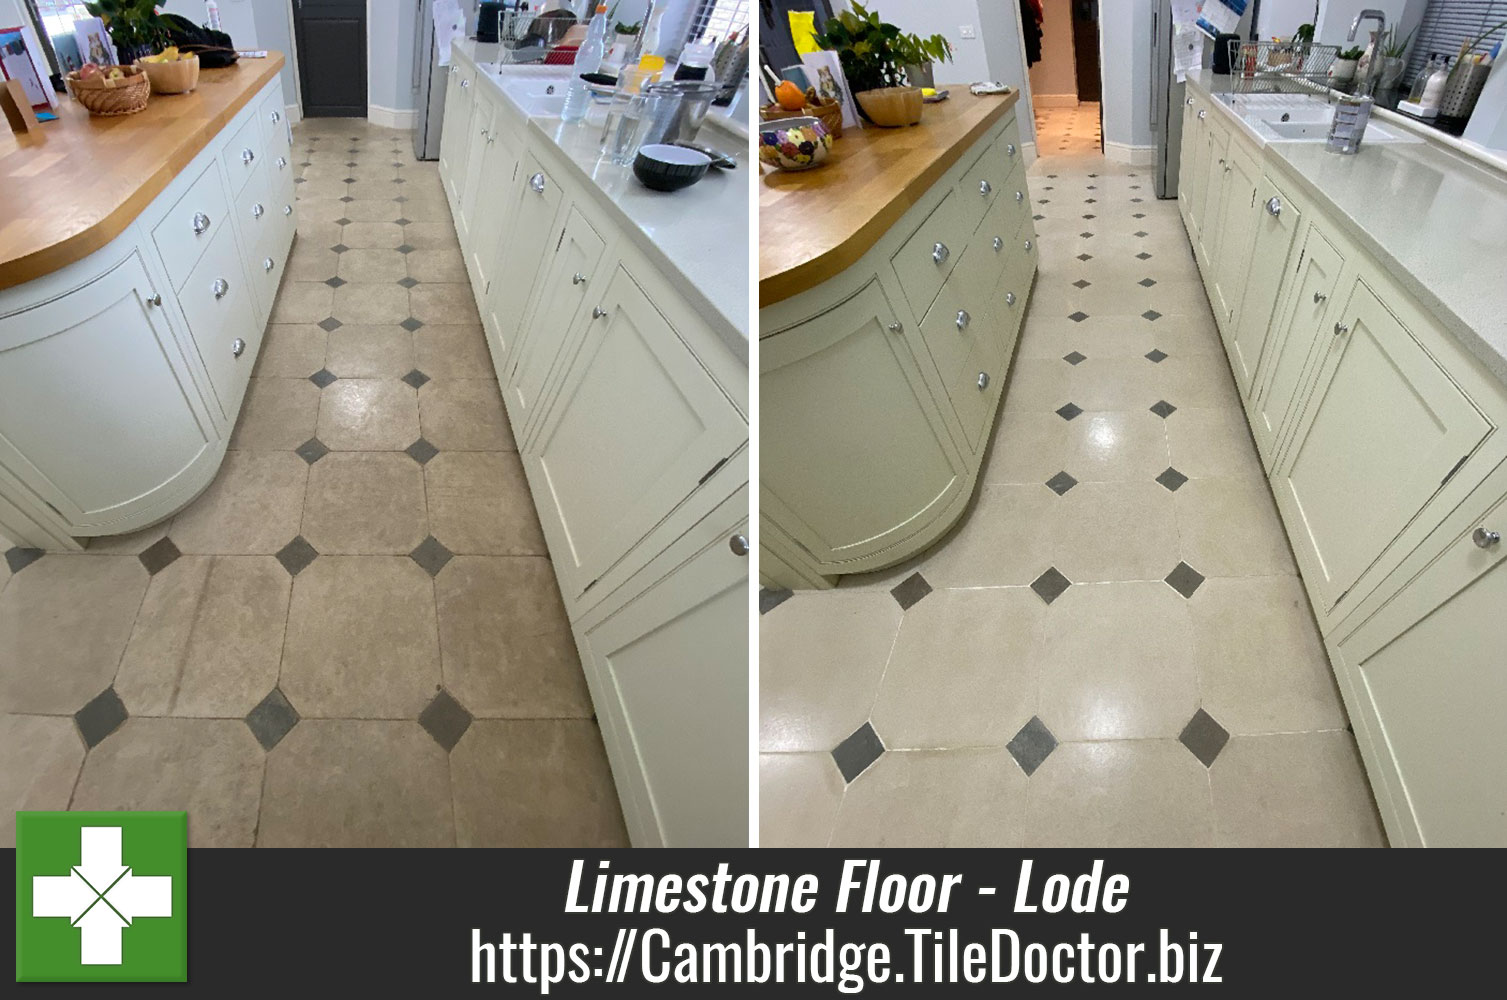 Using Burnishing Pads to Remove Years of Dirt from a Limestone Floor in Lode Cambridge